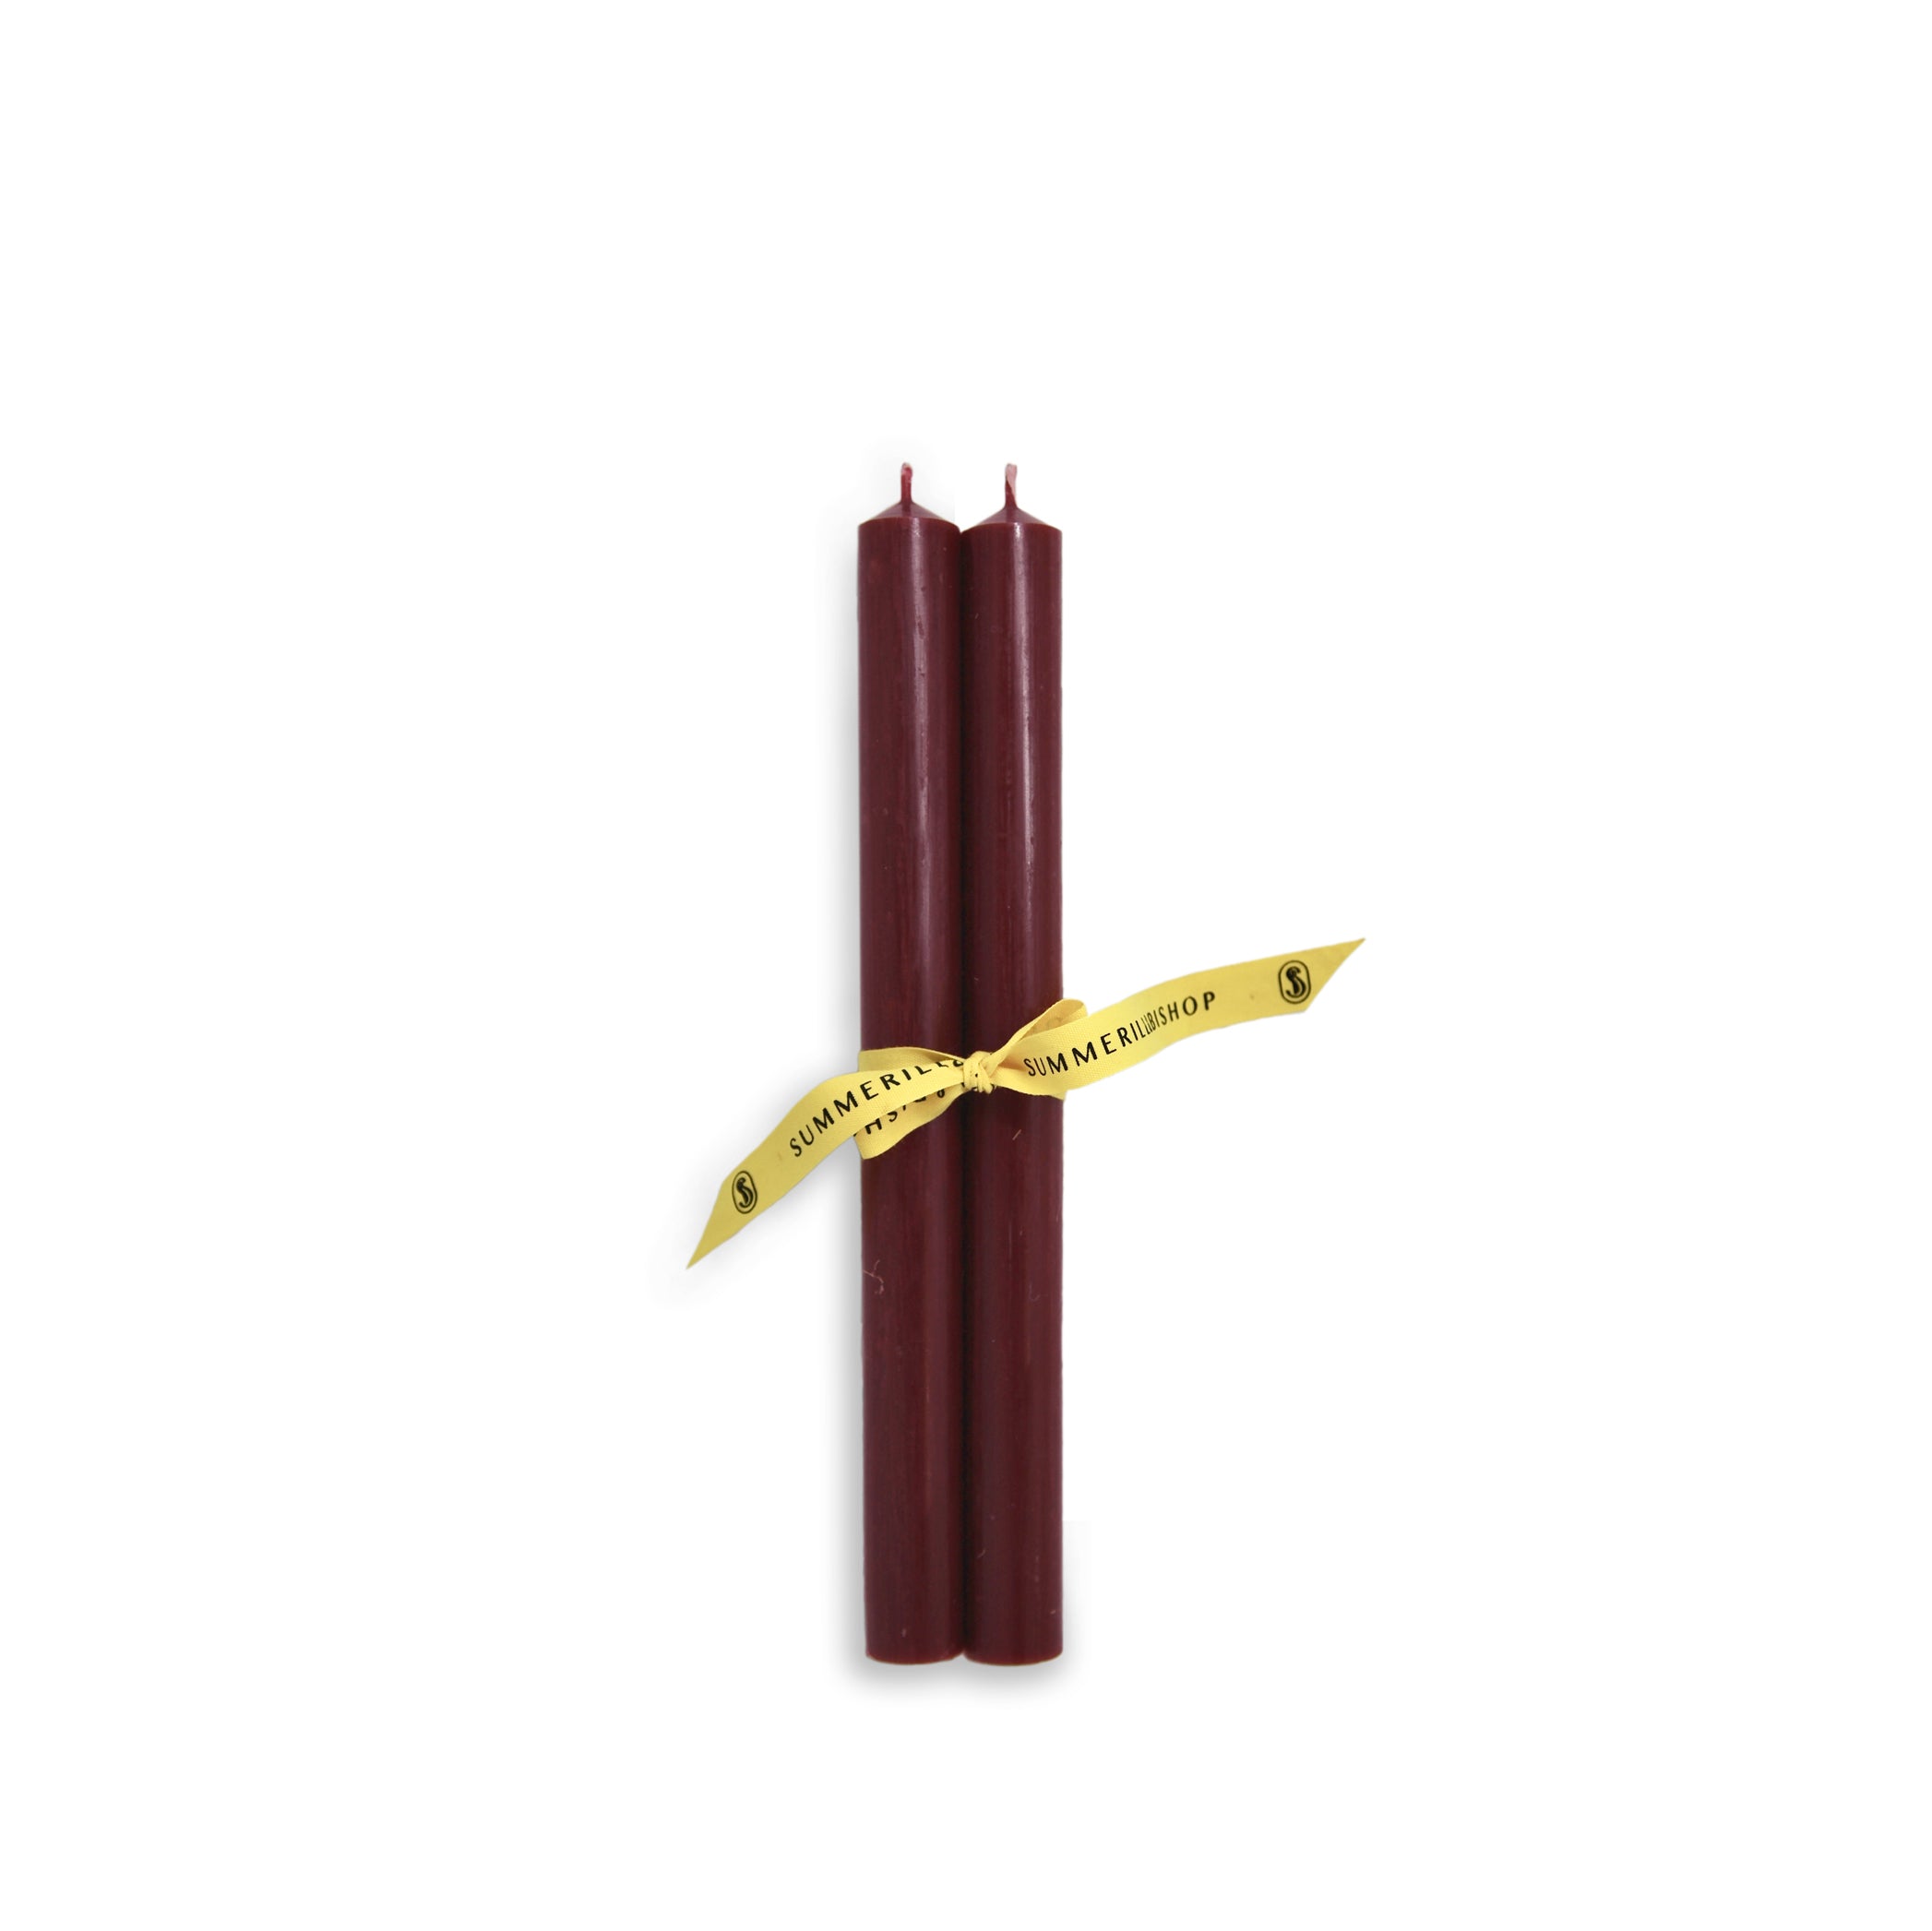 Pair of Coloured Church Candles in Dark Red